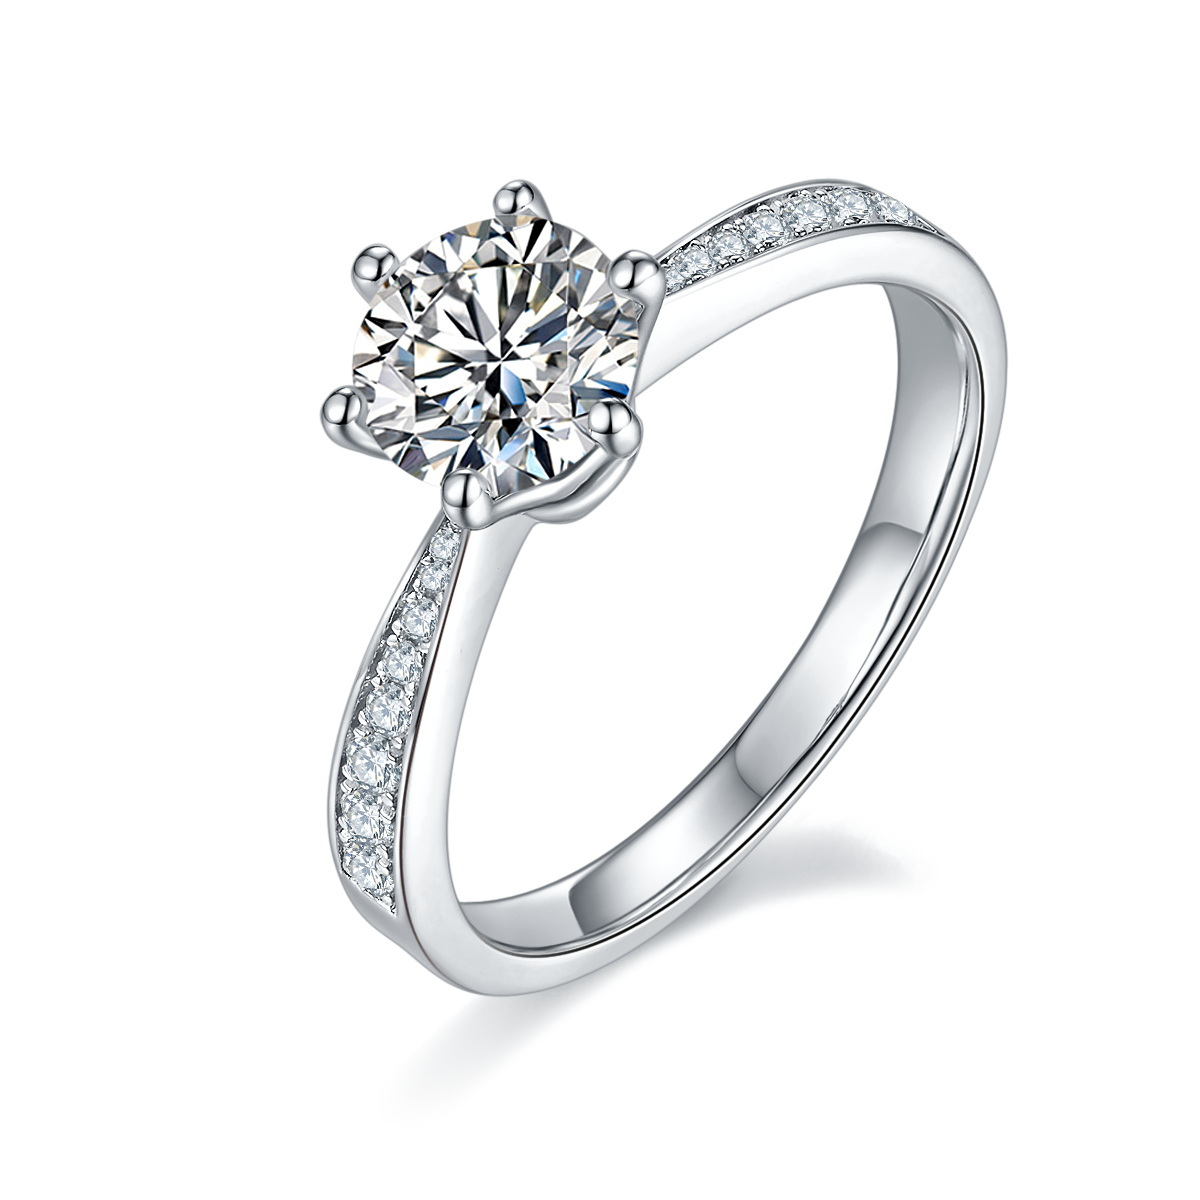 DEDEJILL Graceful Pave Sterling Silver Plated Platinum Round Cut Moissanite Ring-1ct D Grade